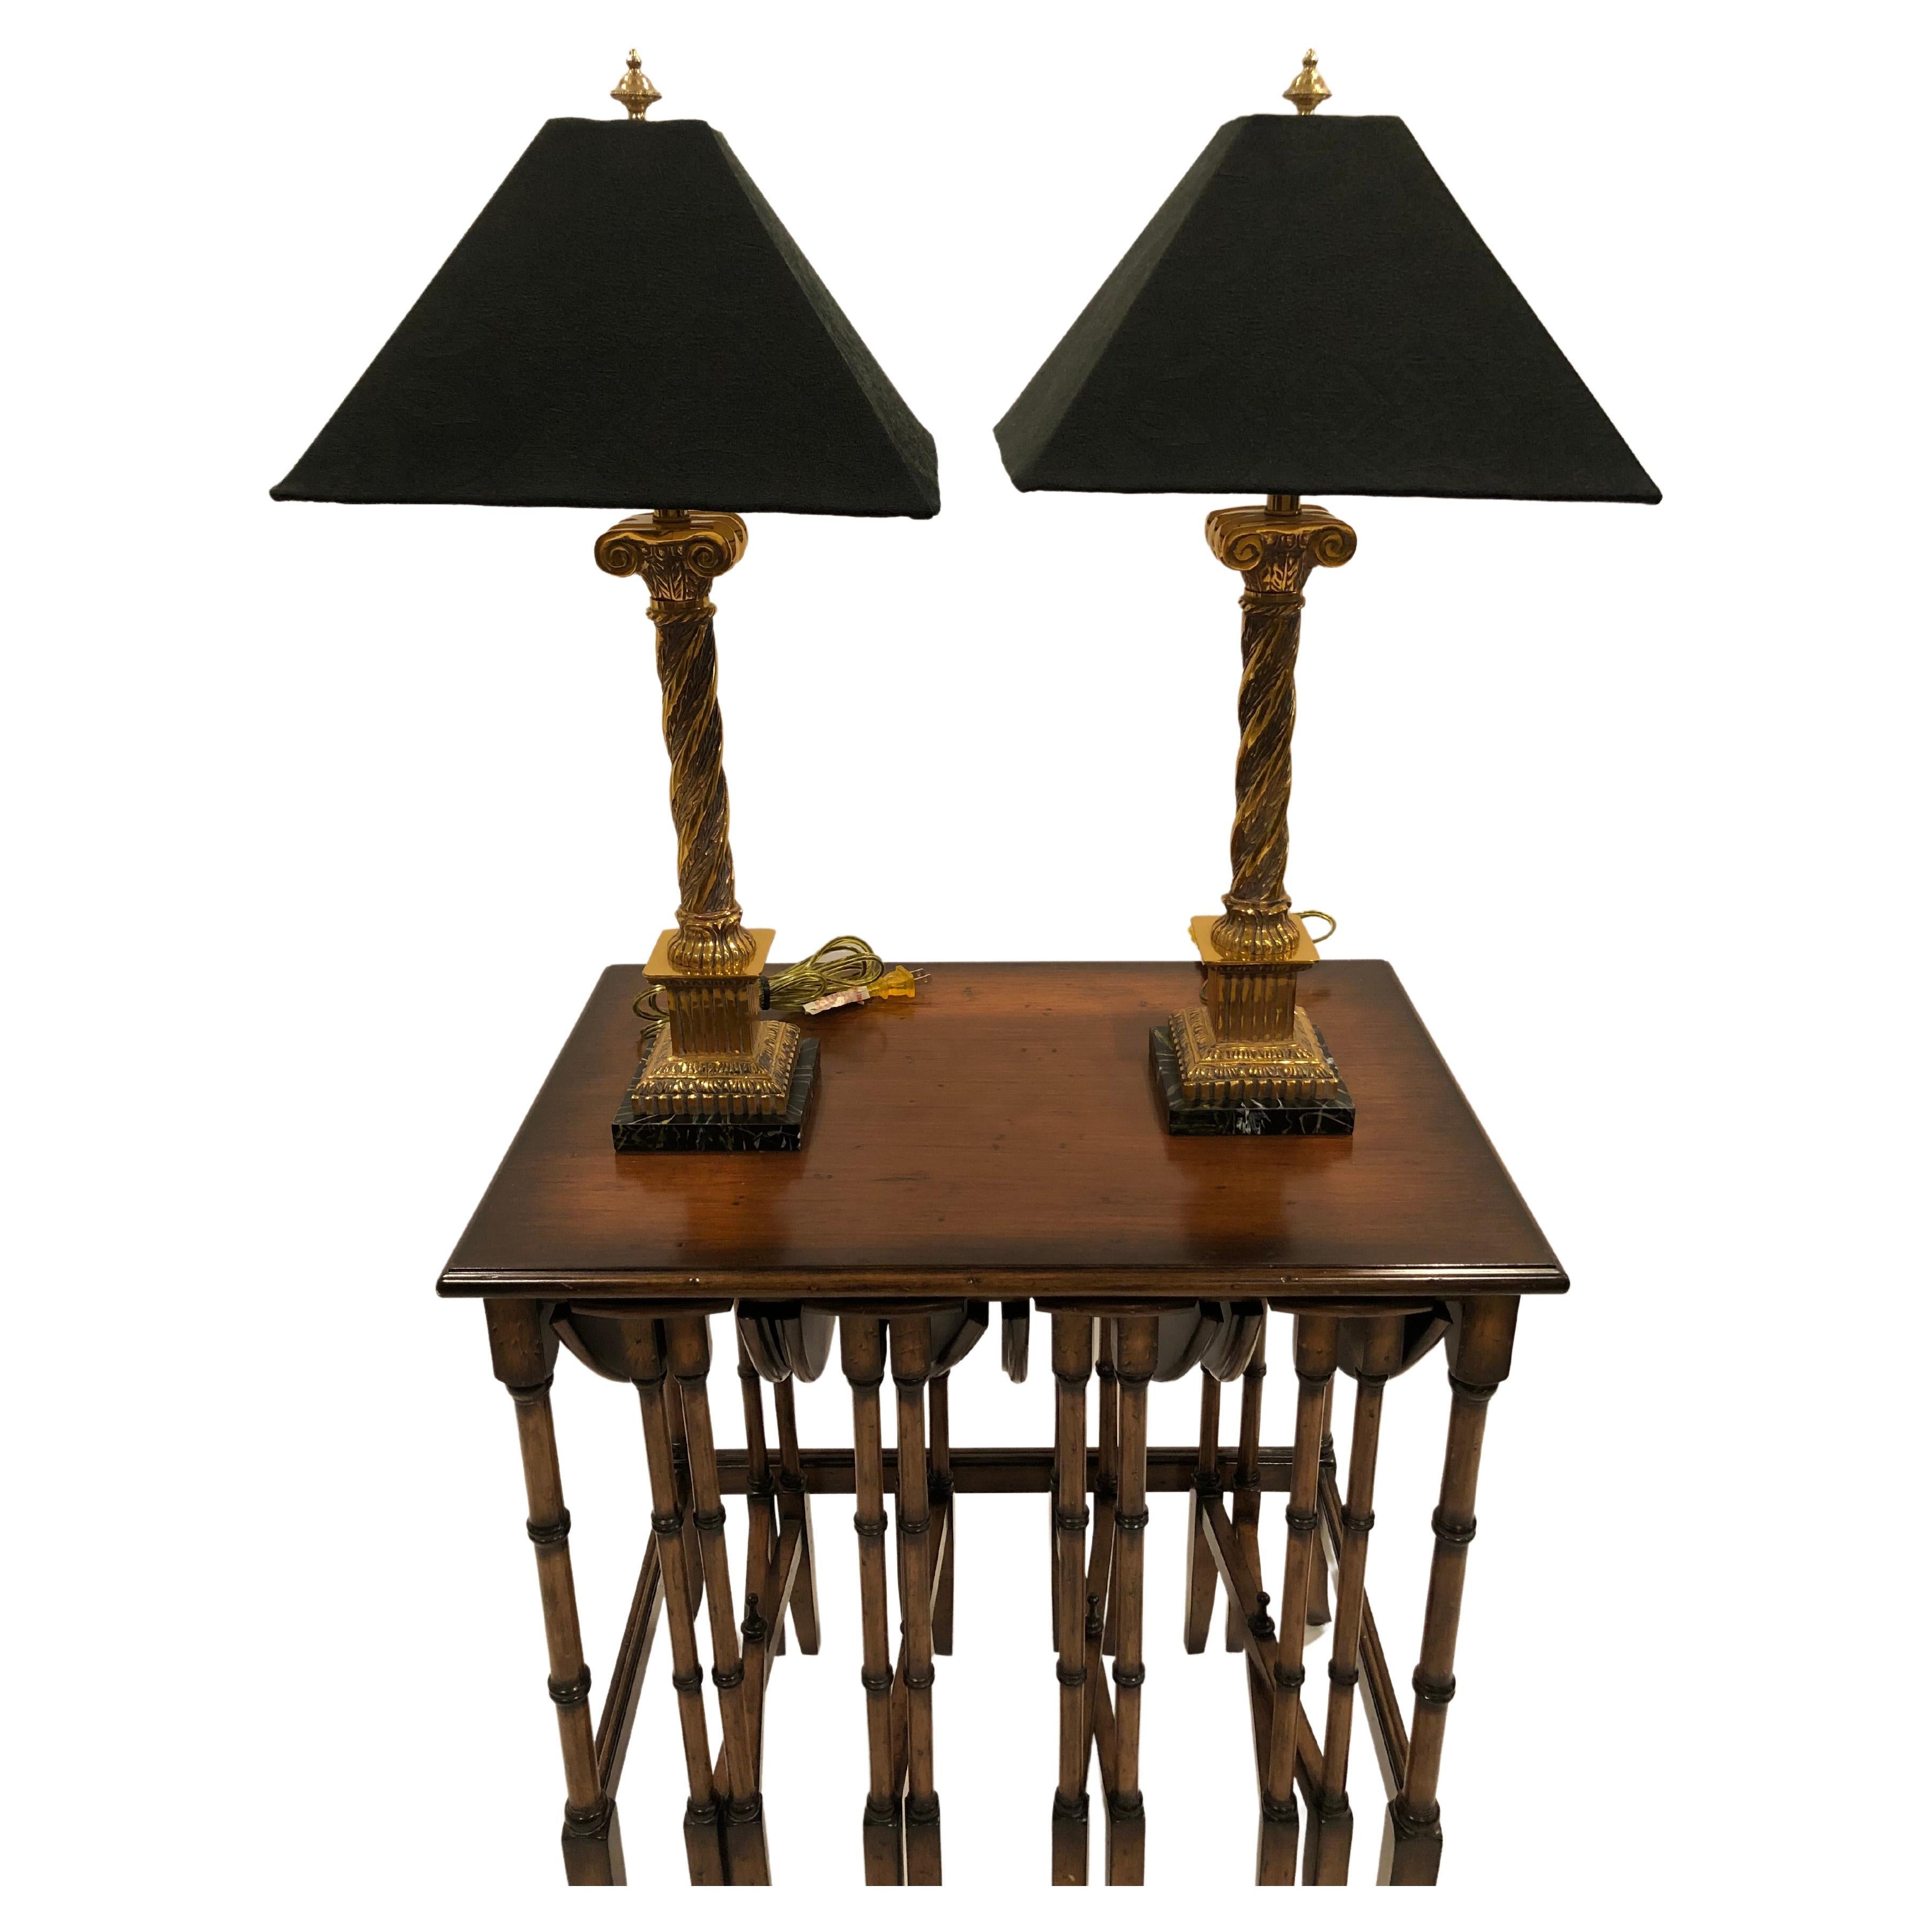 Glamorous Pair of Frederick Cooper Brass Neoclassical Table Lamps For Sale